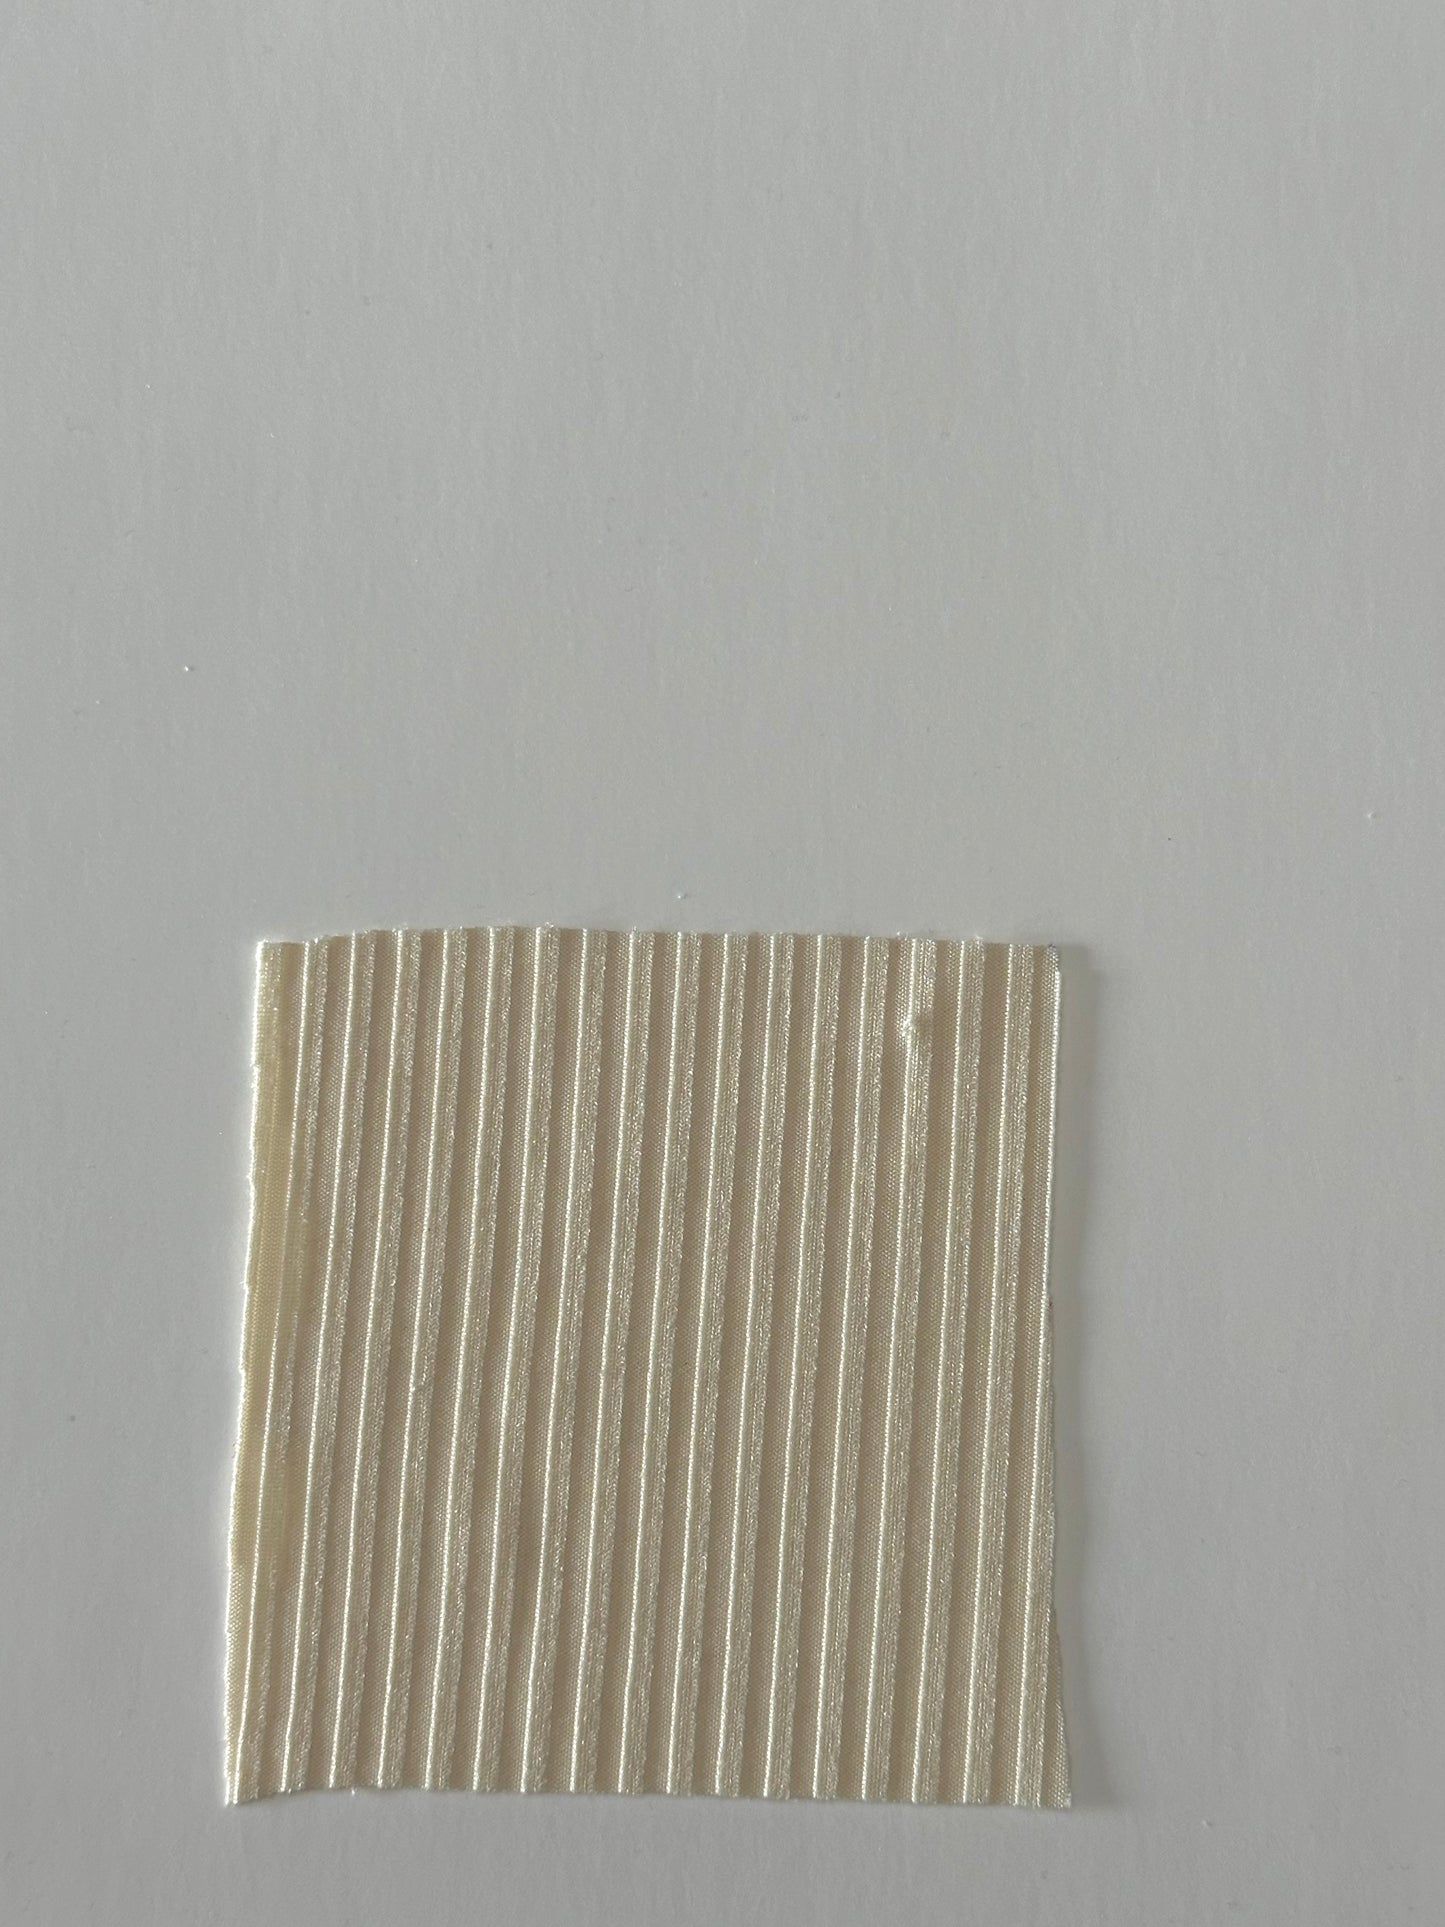 Solid in Cream (new) on Unbrushed Rib Knit Fabric Sold by the 1/4 yard